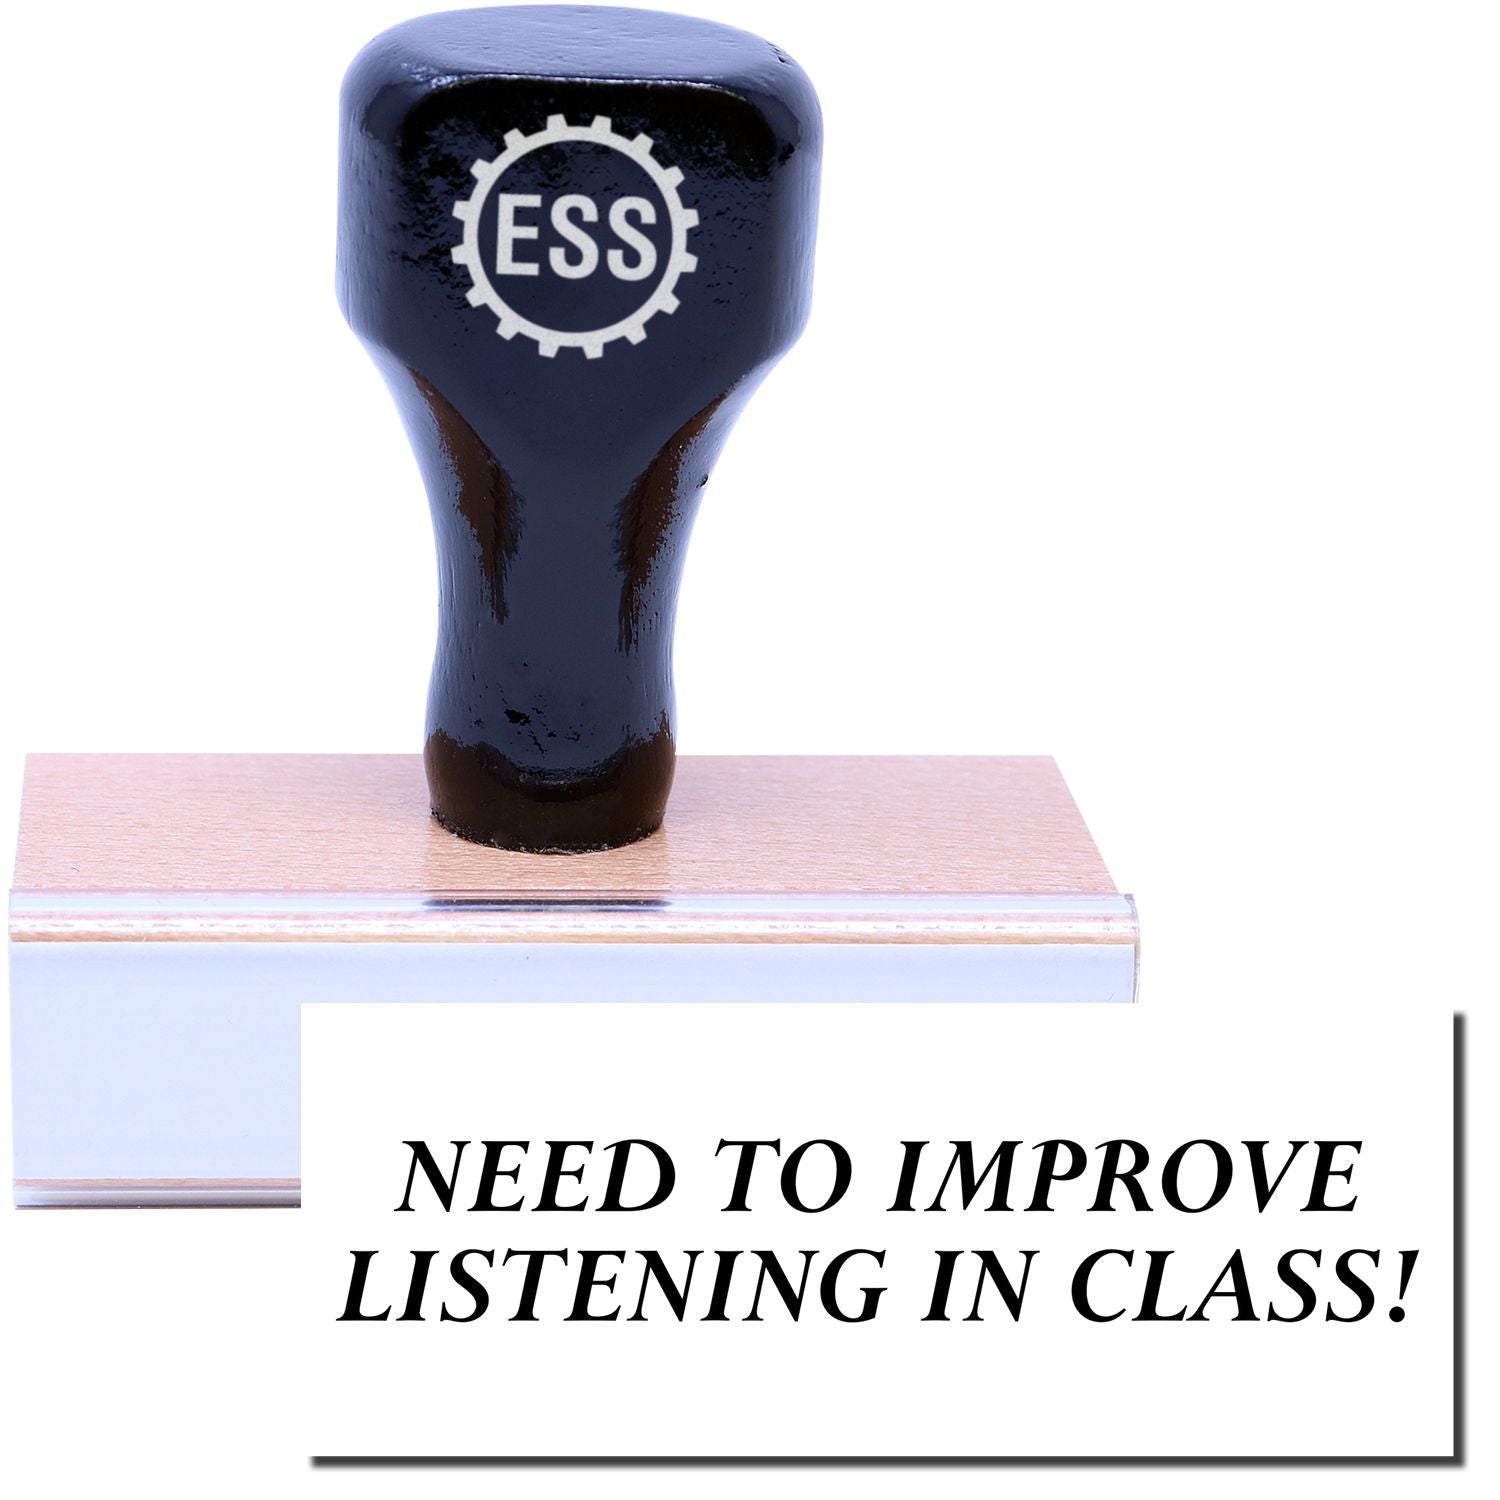 A stock office rubber stamp with a stamped image showing how the text "NEED TO IMPROVE LISTENING IN CLASS!" is displayed after stamping.